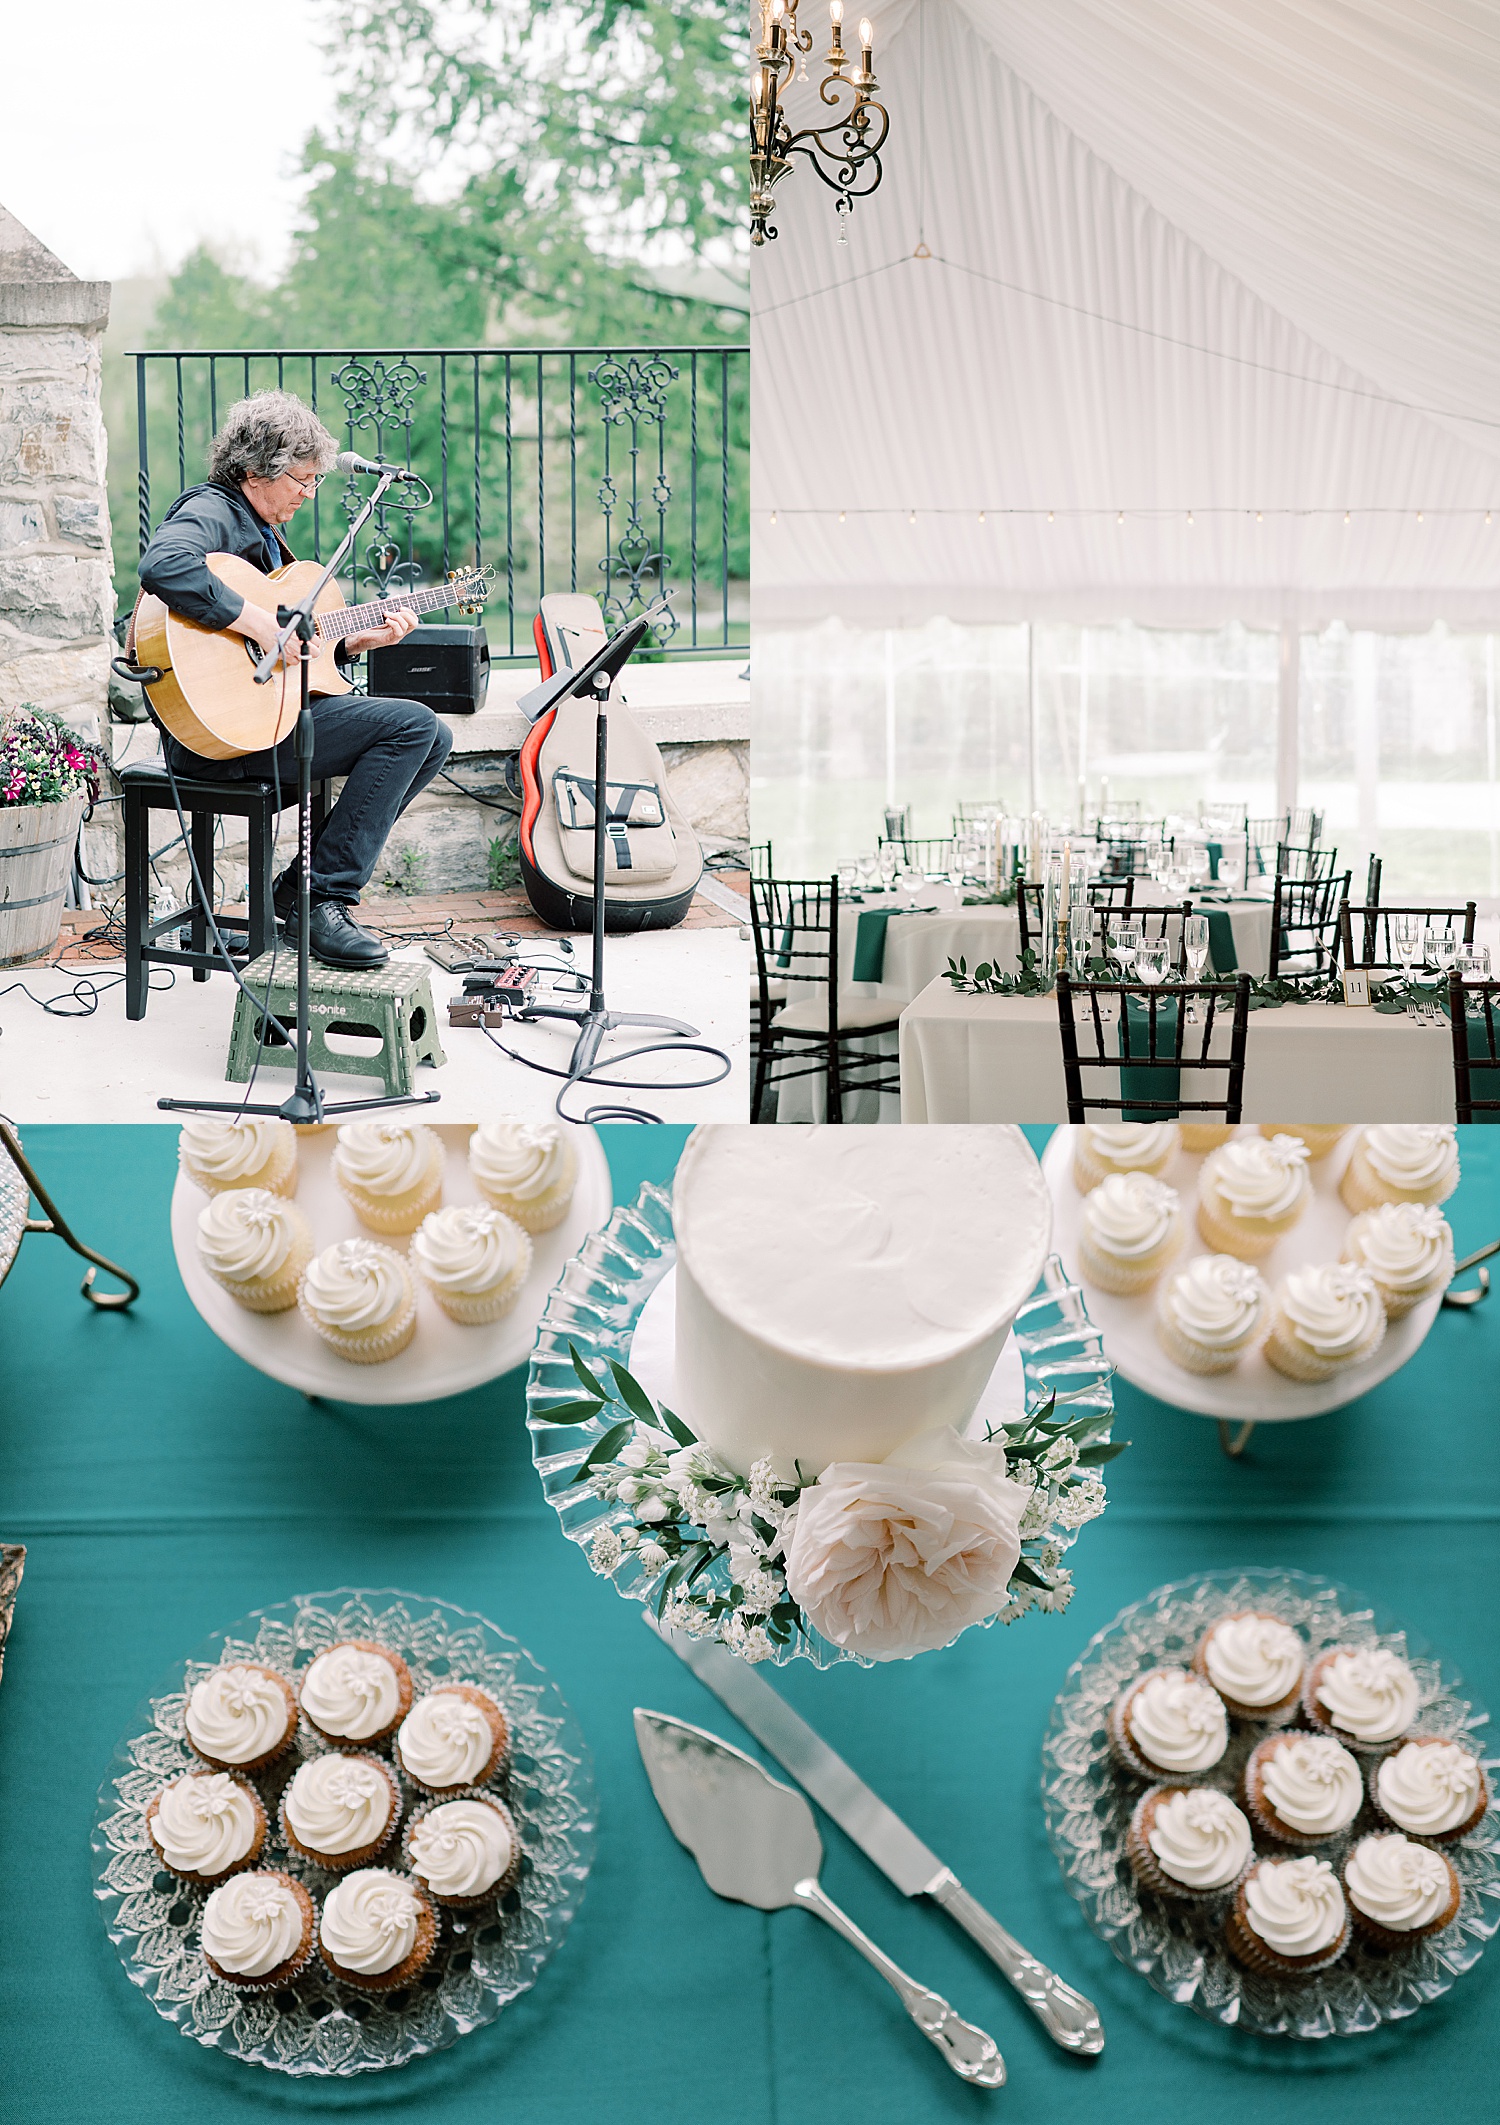 wedding reception location under large white event tent with wedding cake and cupcakes 